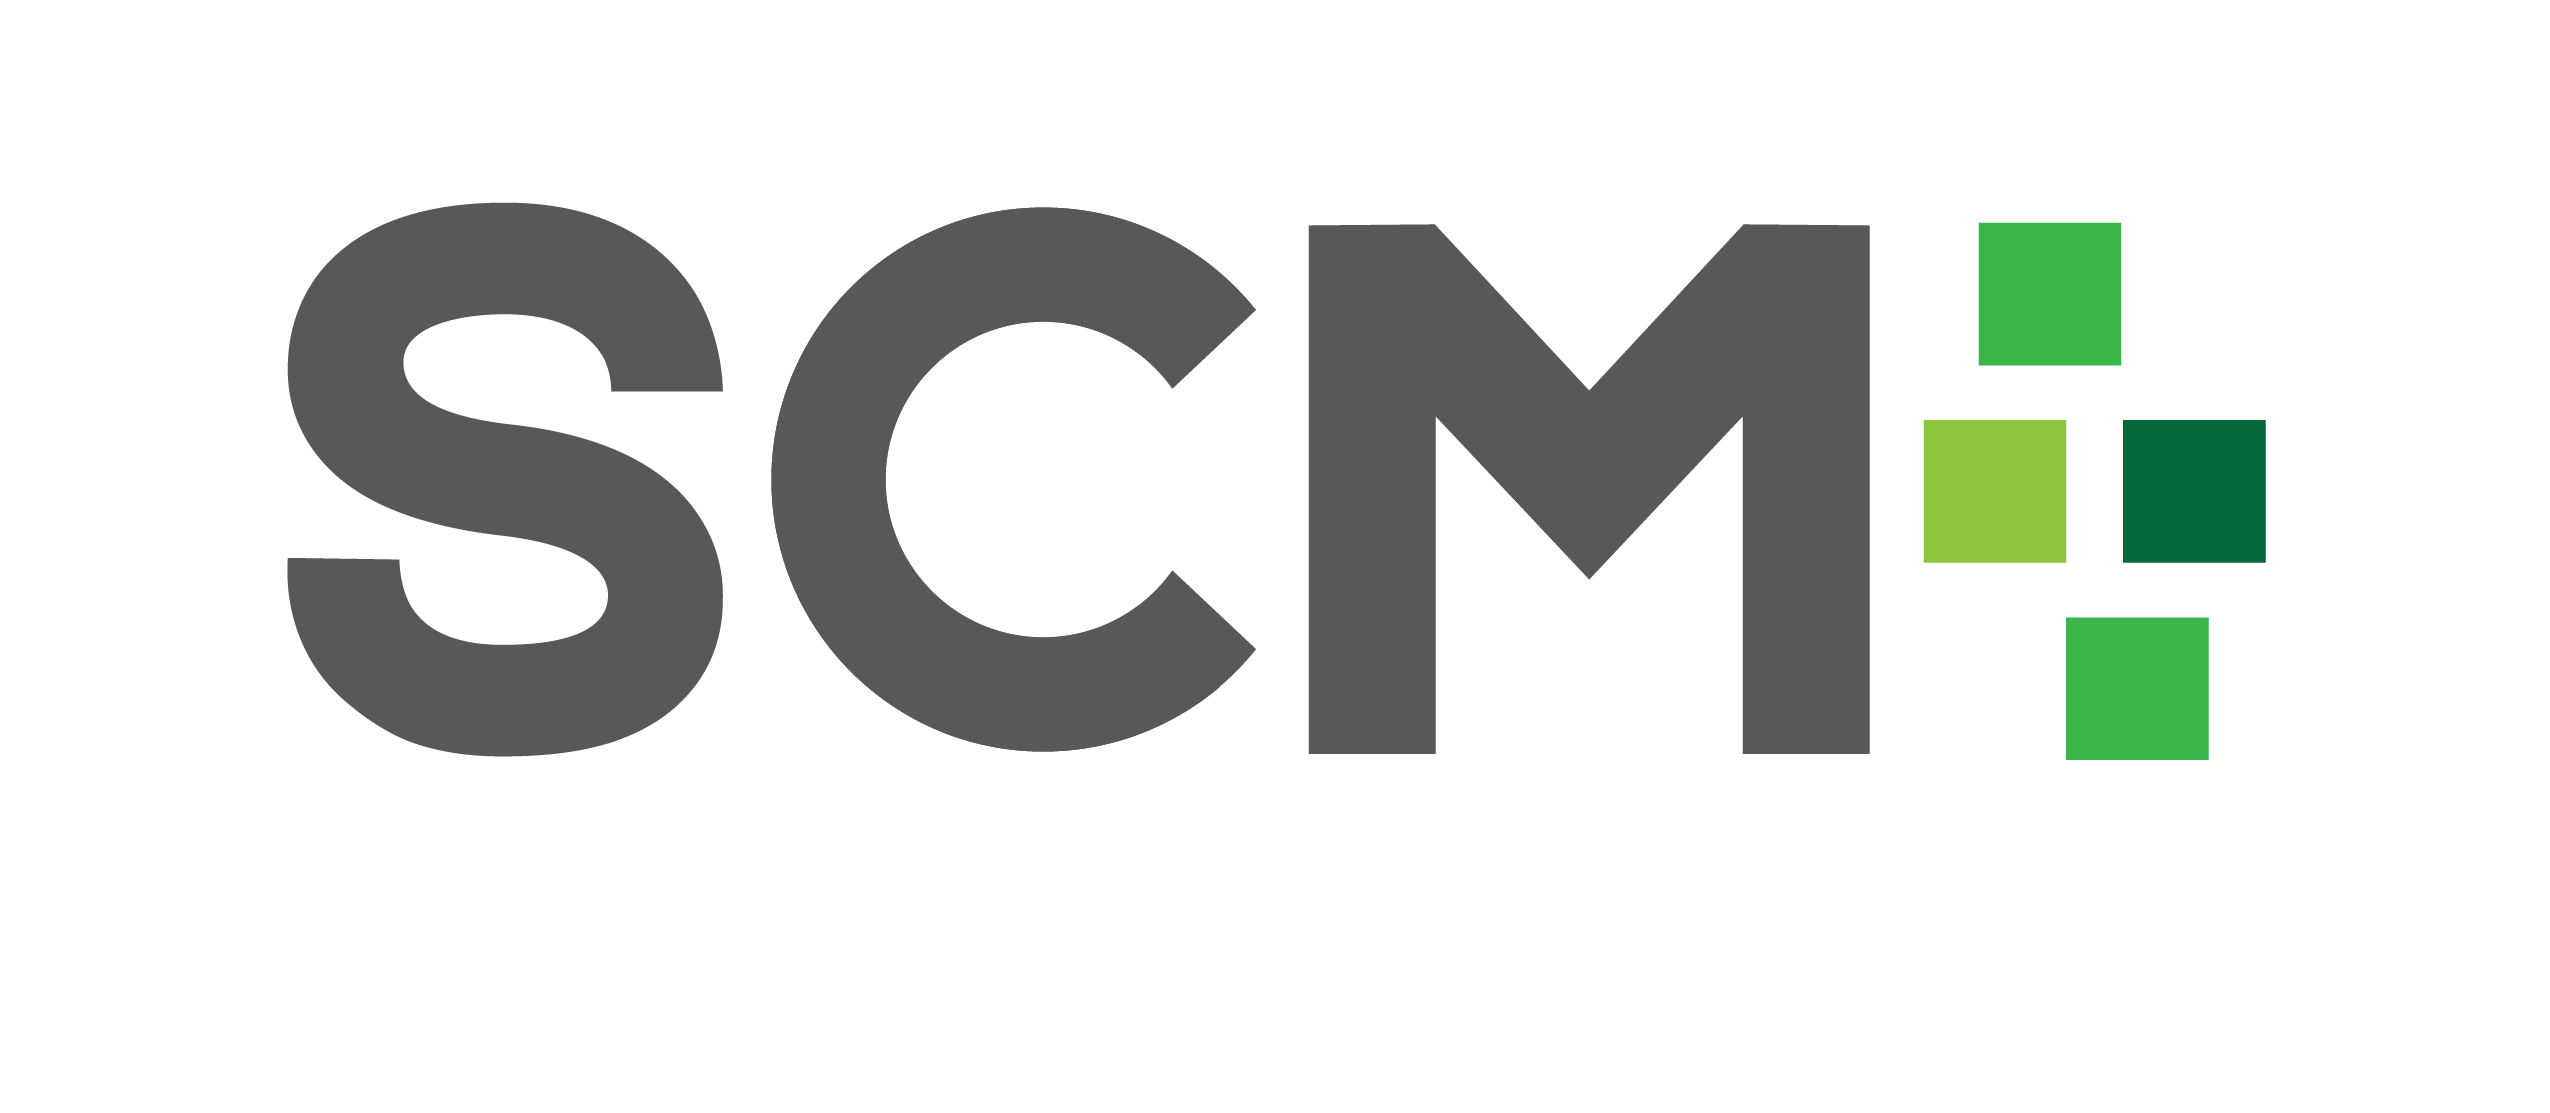 SCM Logo - SCM Marketing Solutions | Driven People, Dedicated To Growing Your ...